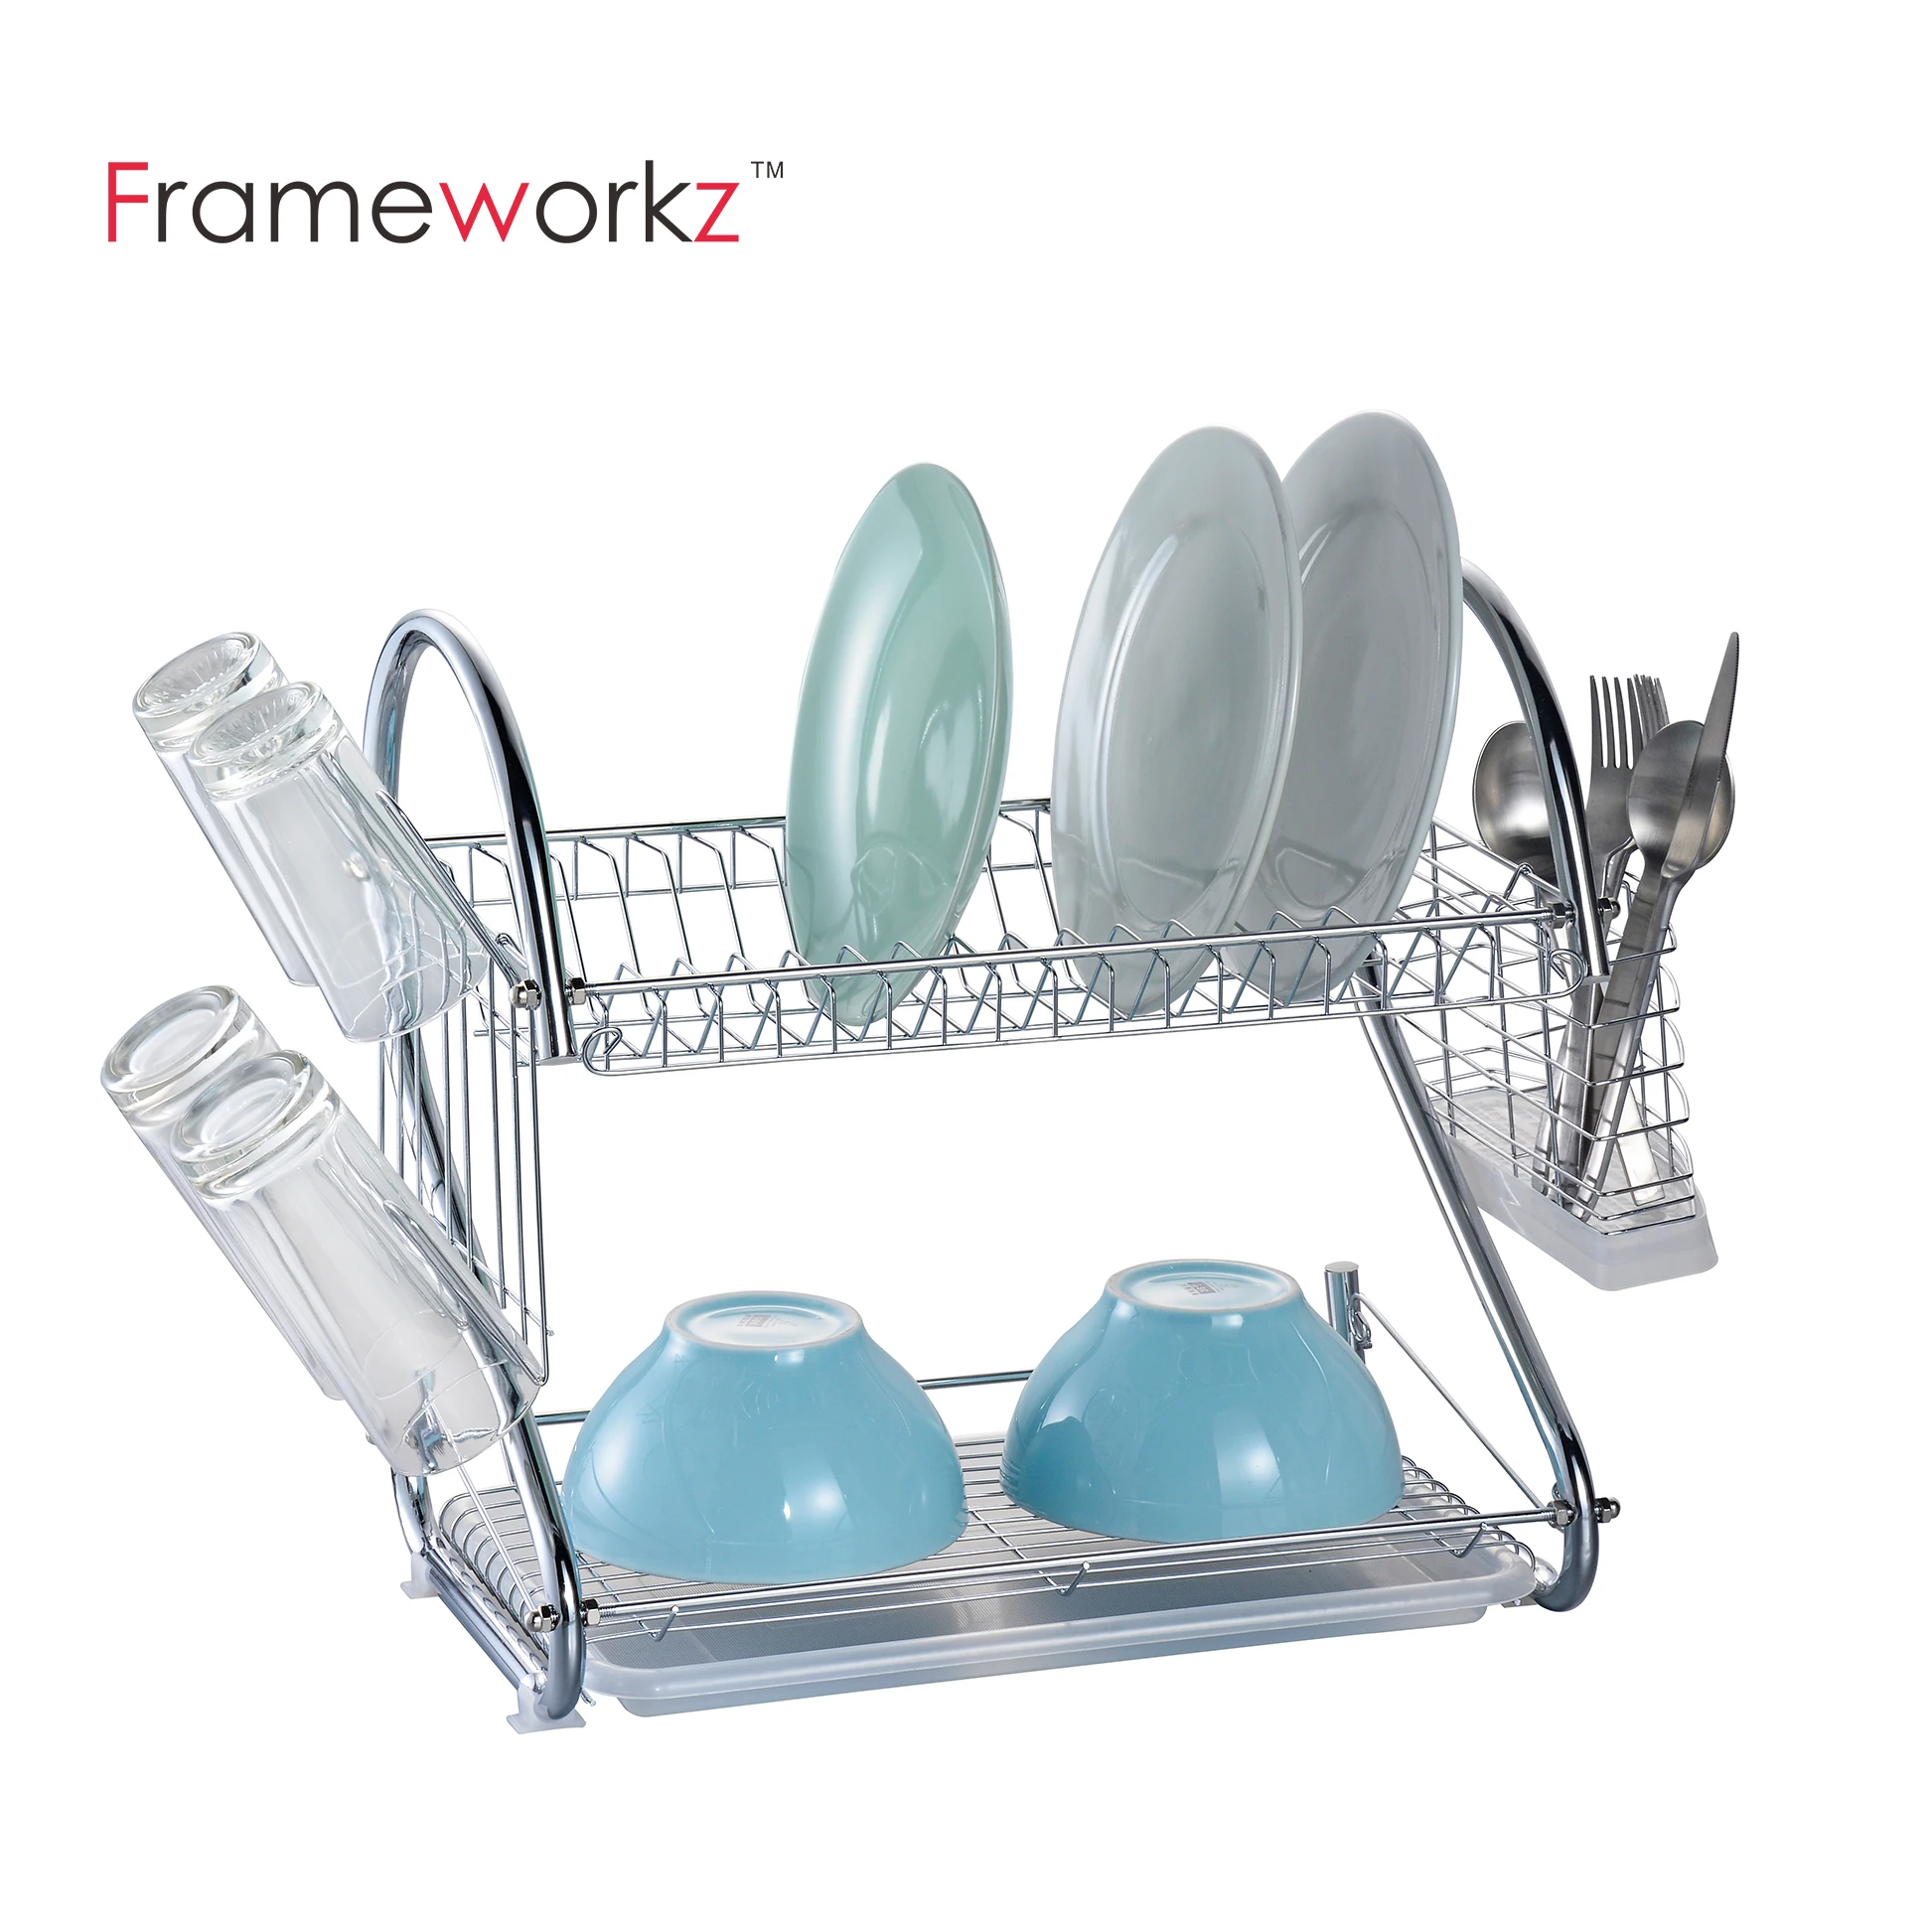 Dish Drying Rack for Kitchen Counter, Large 2 Tier Rustproof Stainless  Steel Dis